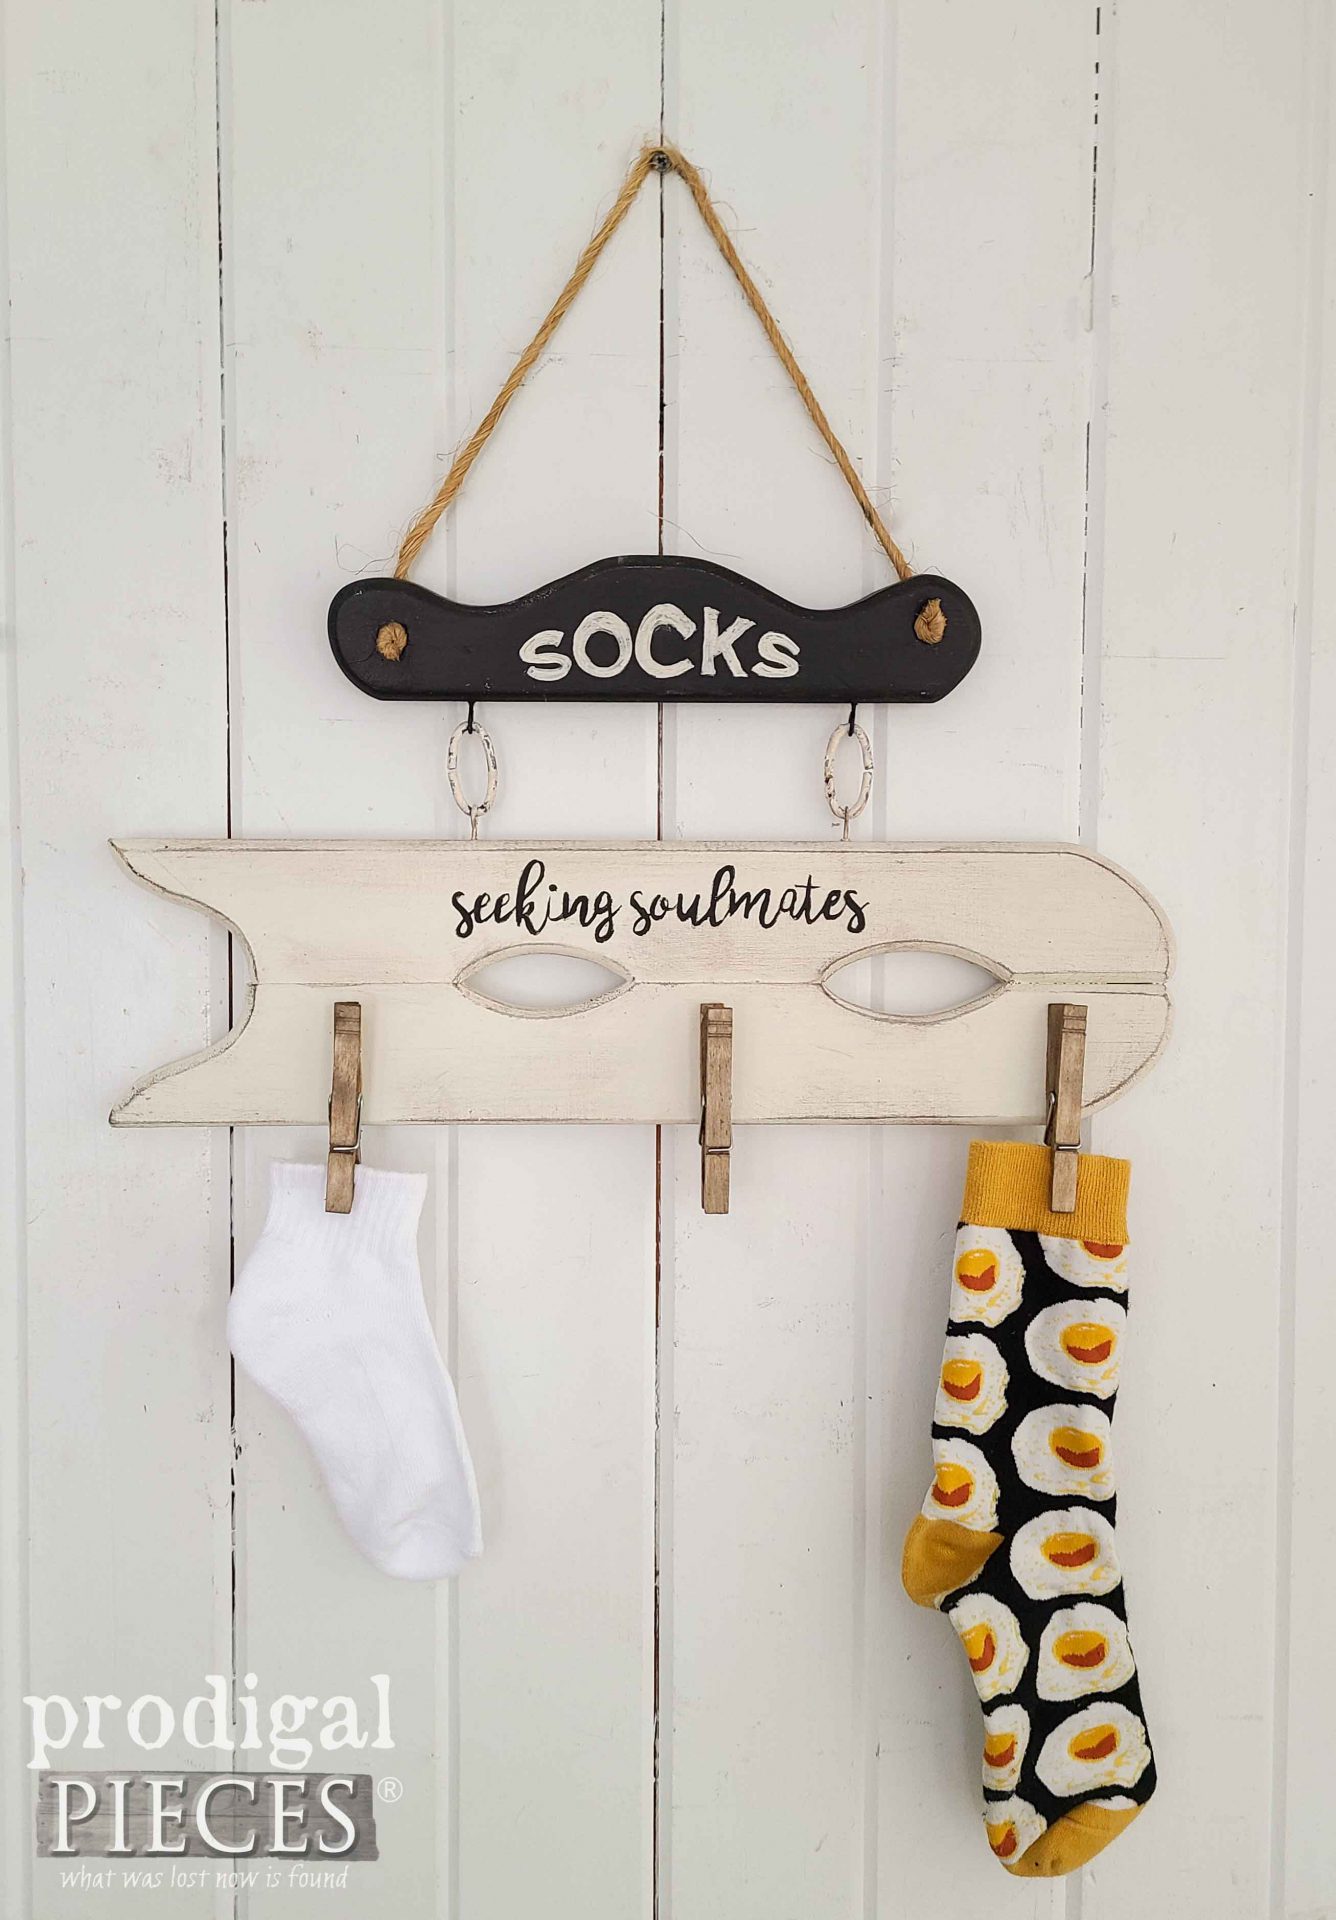 Upcycled Laundry Sign Missing Sock Holder by Larissa of Prodigal Pieces | prodigalpieces.com #prodigalpieces #upcycled #diy #home #homedecor #laundry